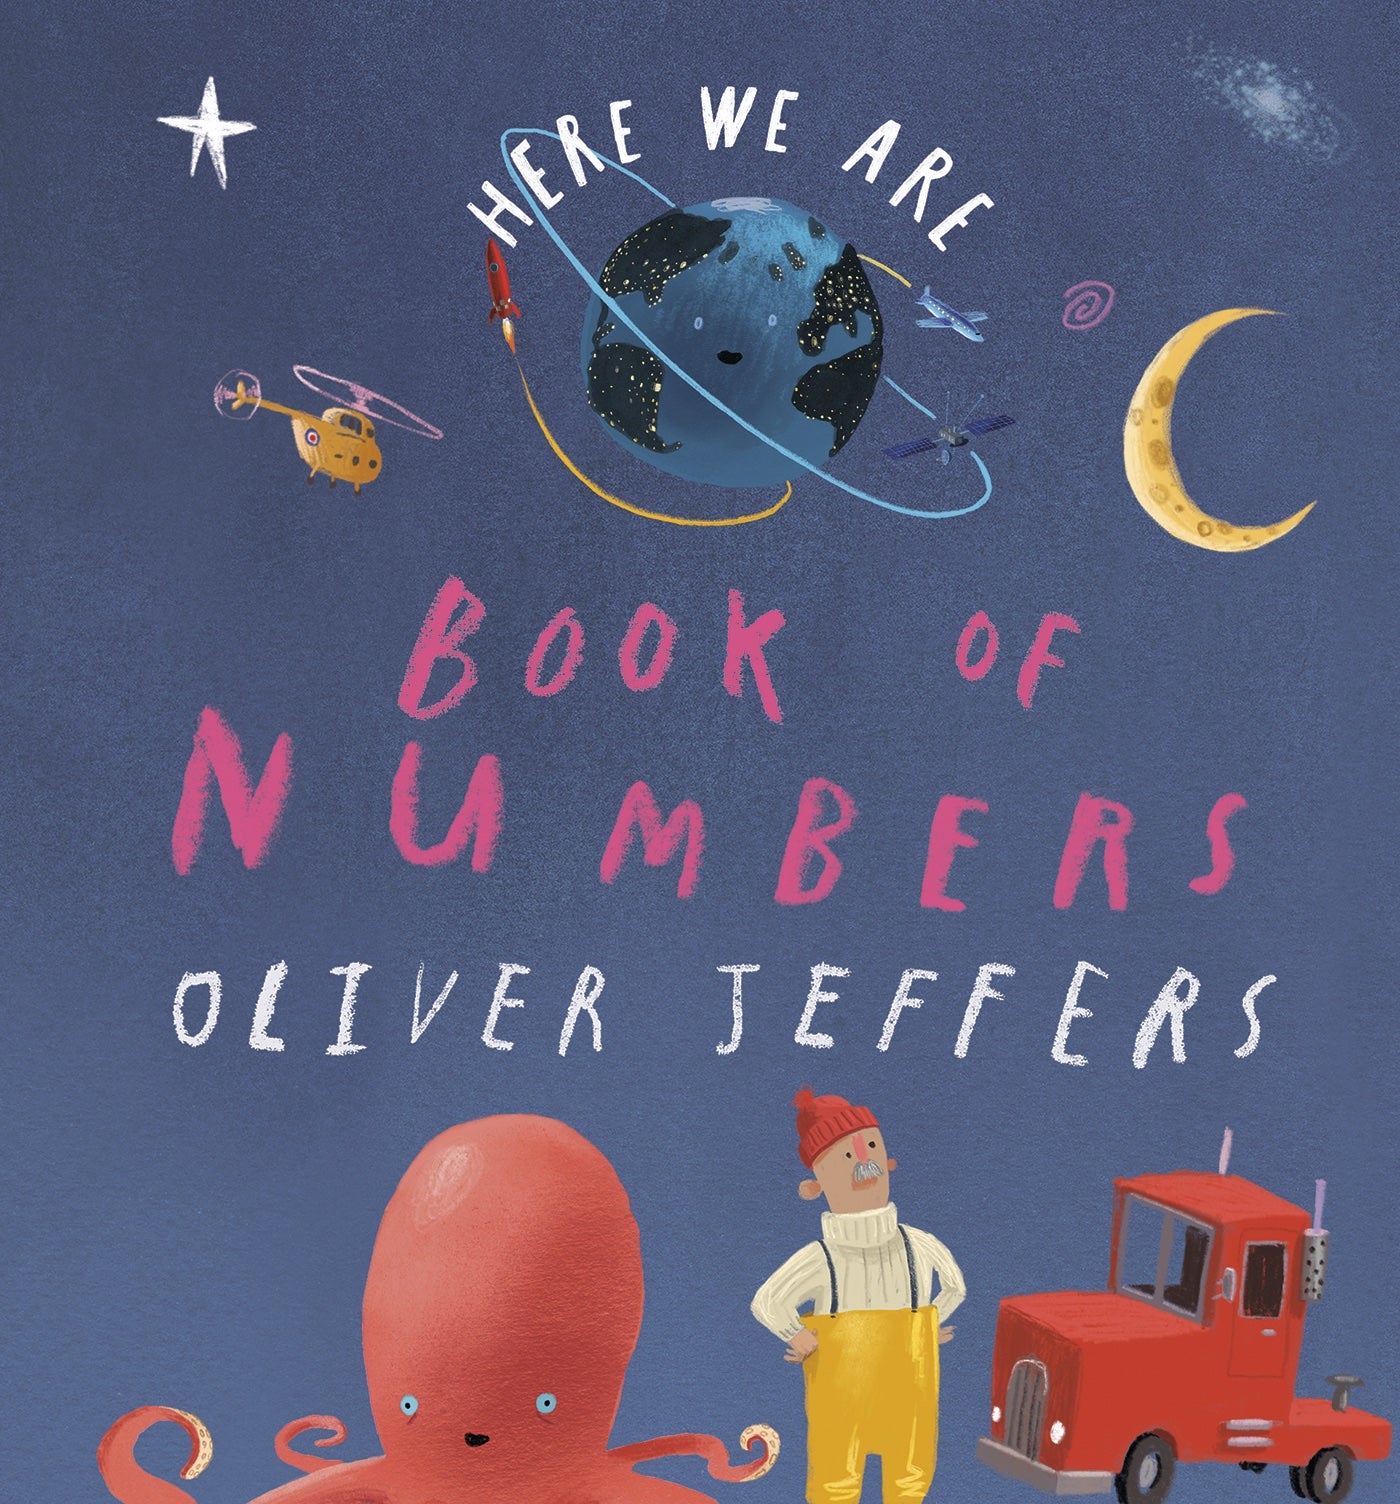 here we are: book of numbers